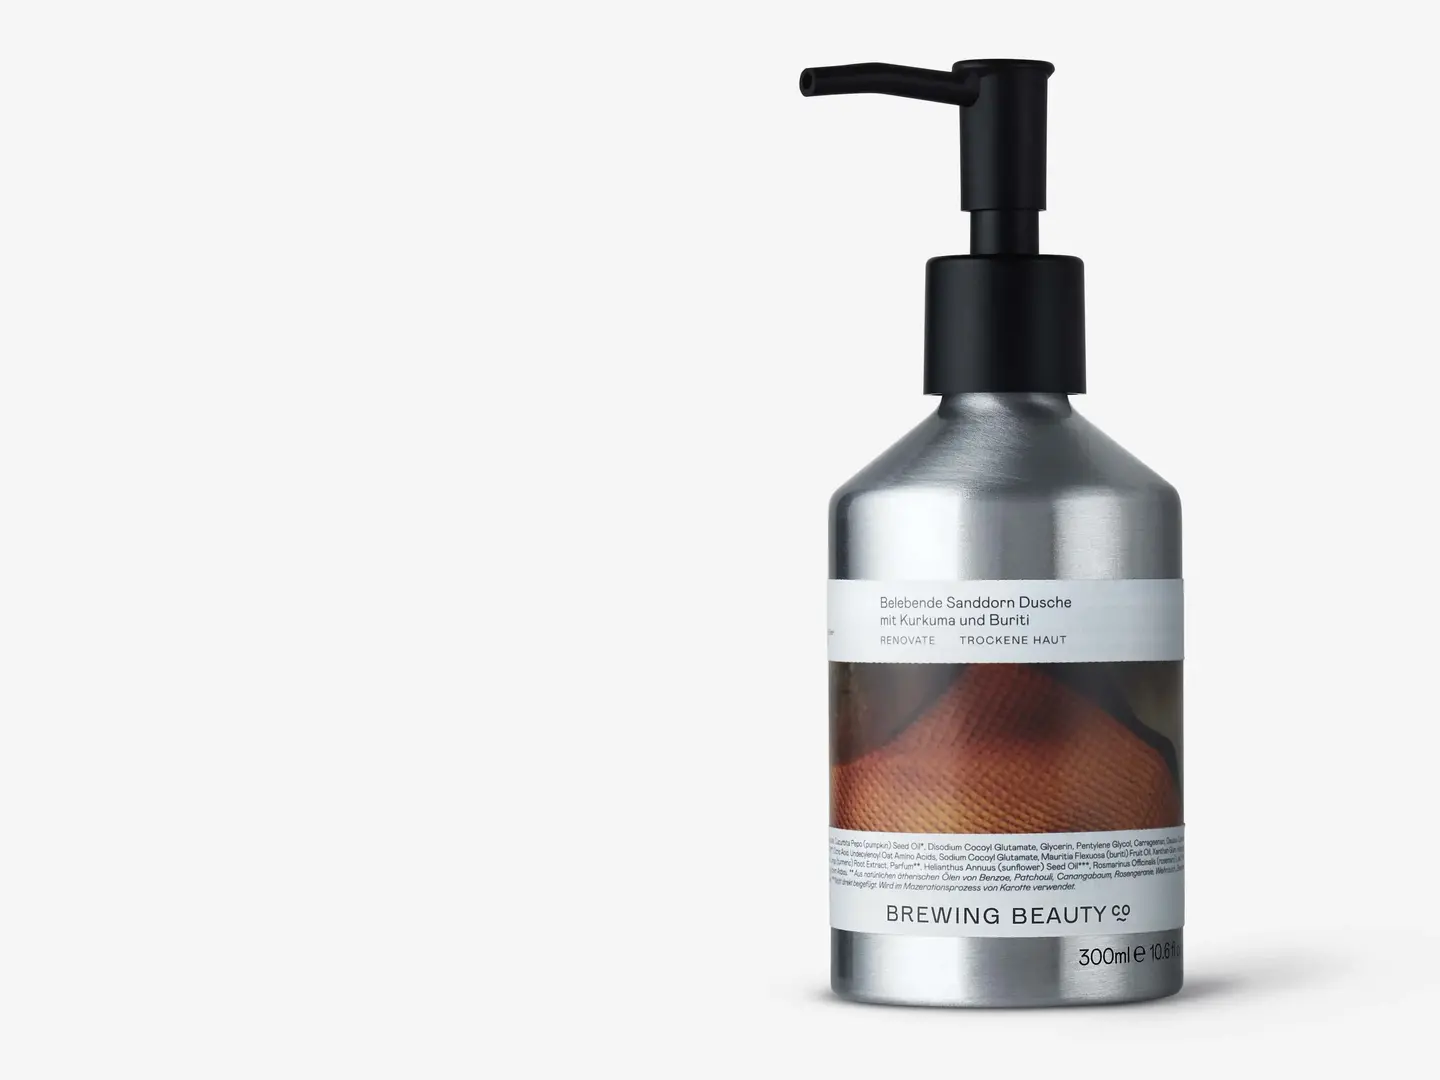 Cleanse with Replenishing Sea Buckthorn Body Cleanser